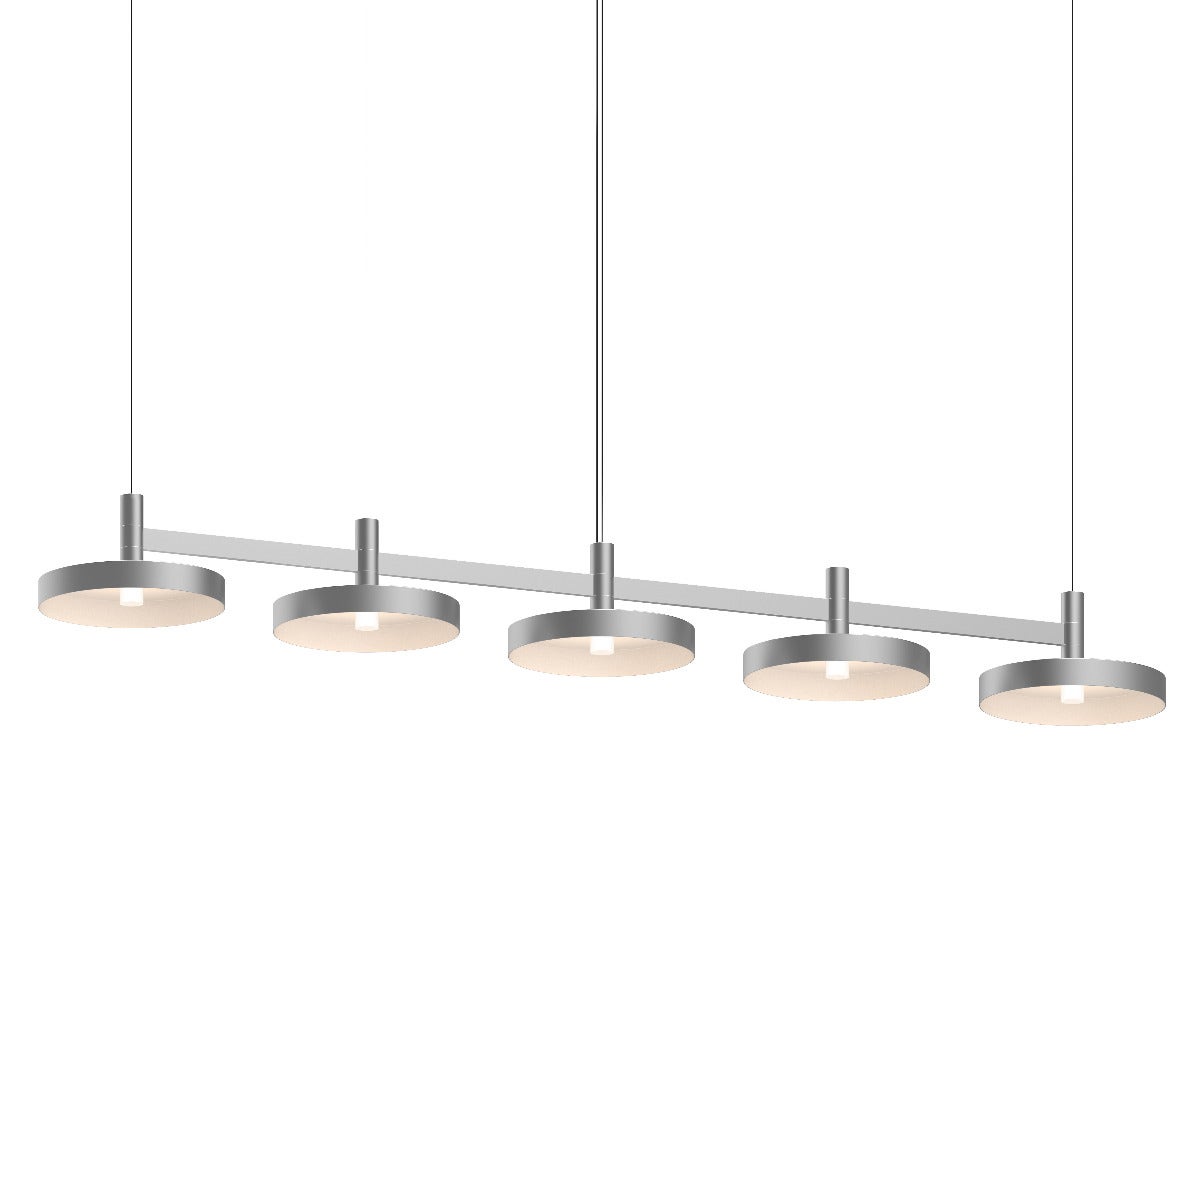 Sonneman Systema Staccato 5-Light Linear Pendant w/Pan Shades